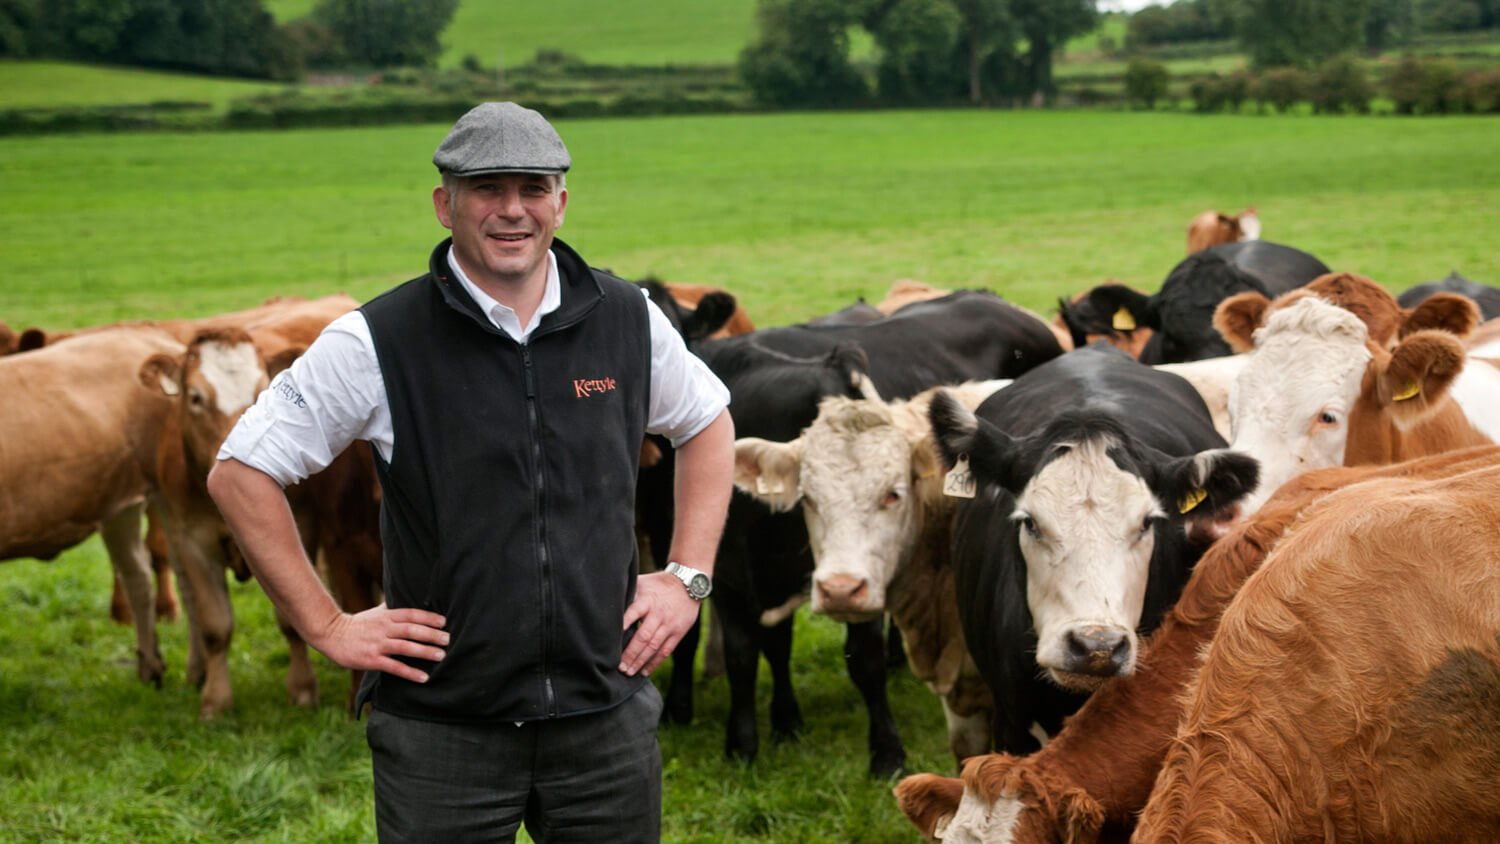 Cows and cattle in a green field with farmer in Ireland